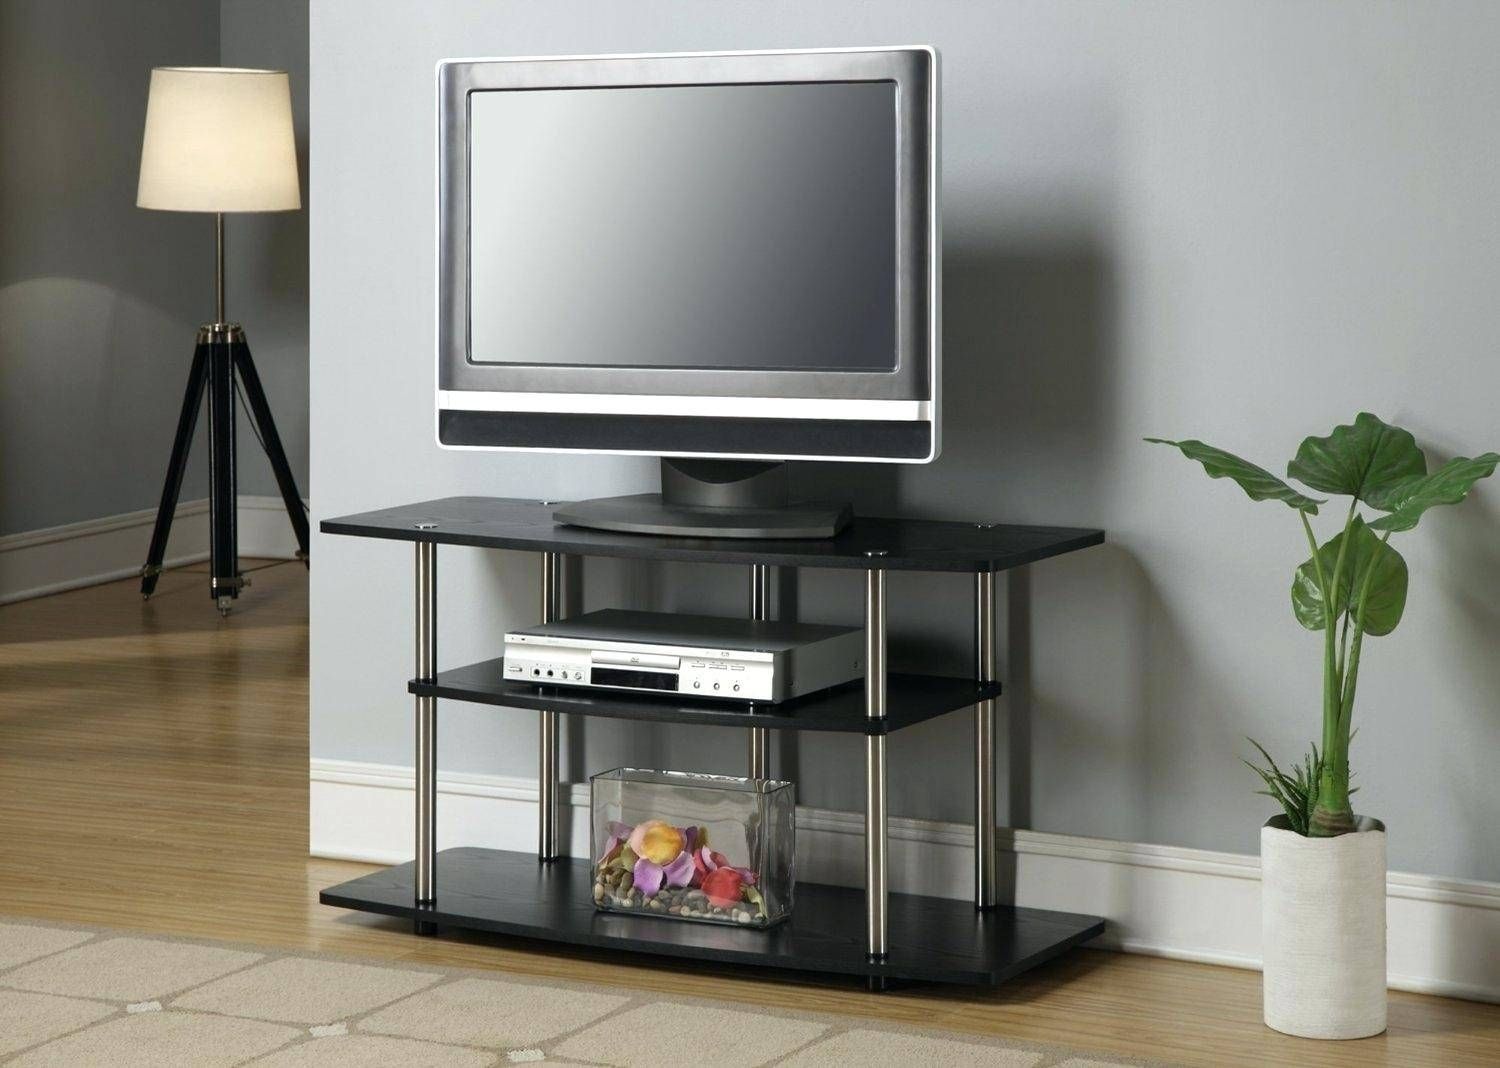 Tv Stand : 42 Wooden Tv Stand 112 Innovative Large Size Of Tv With Tv Stands 40 Inches Wide (View 13 of 15)